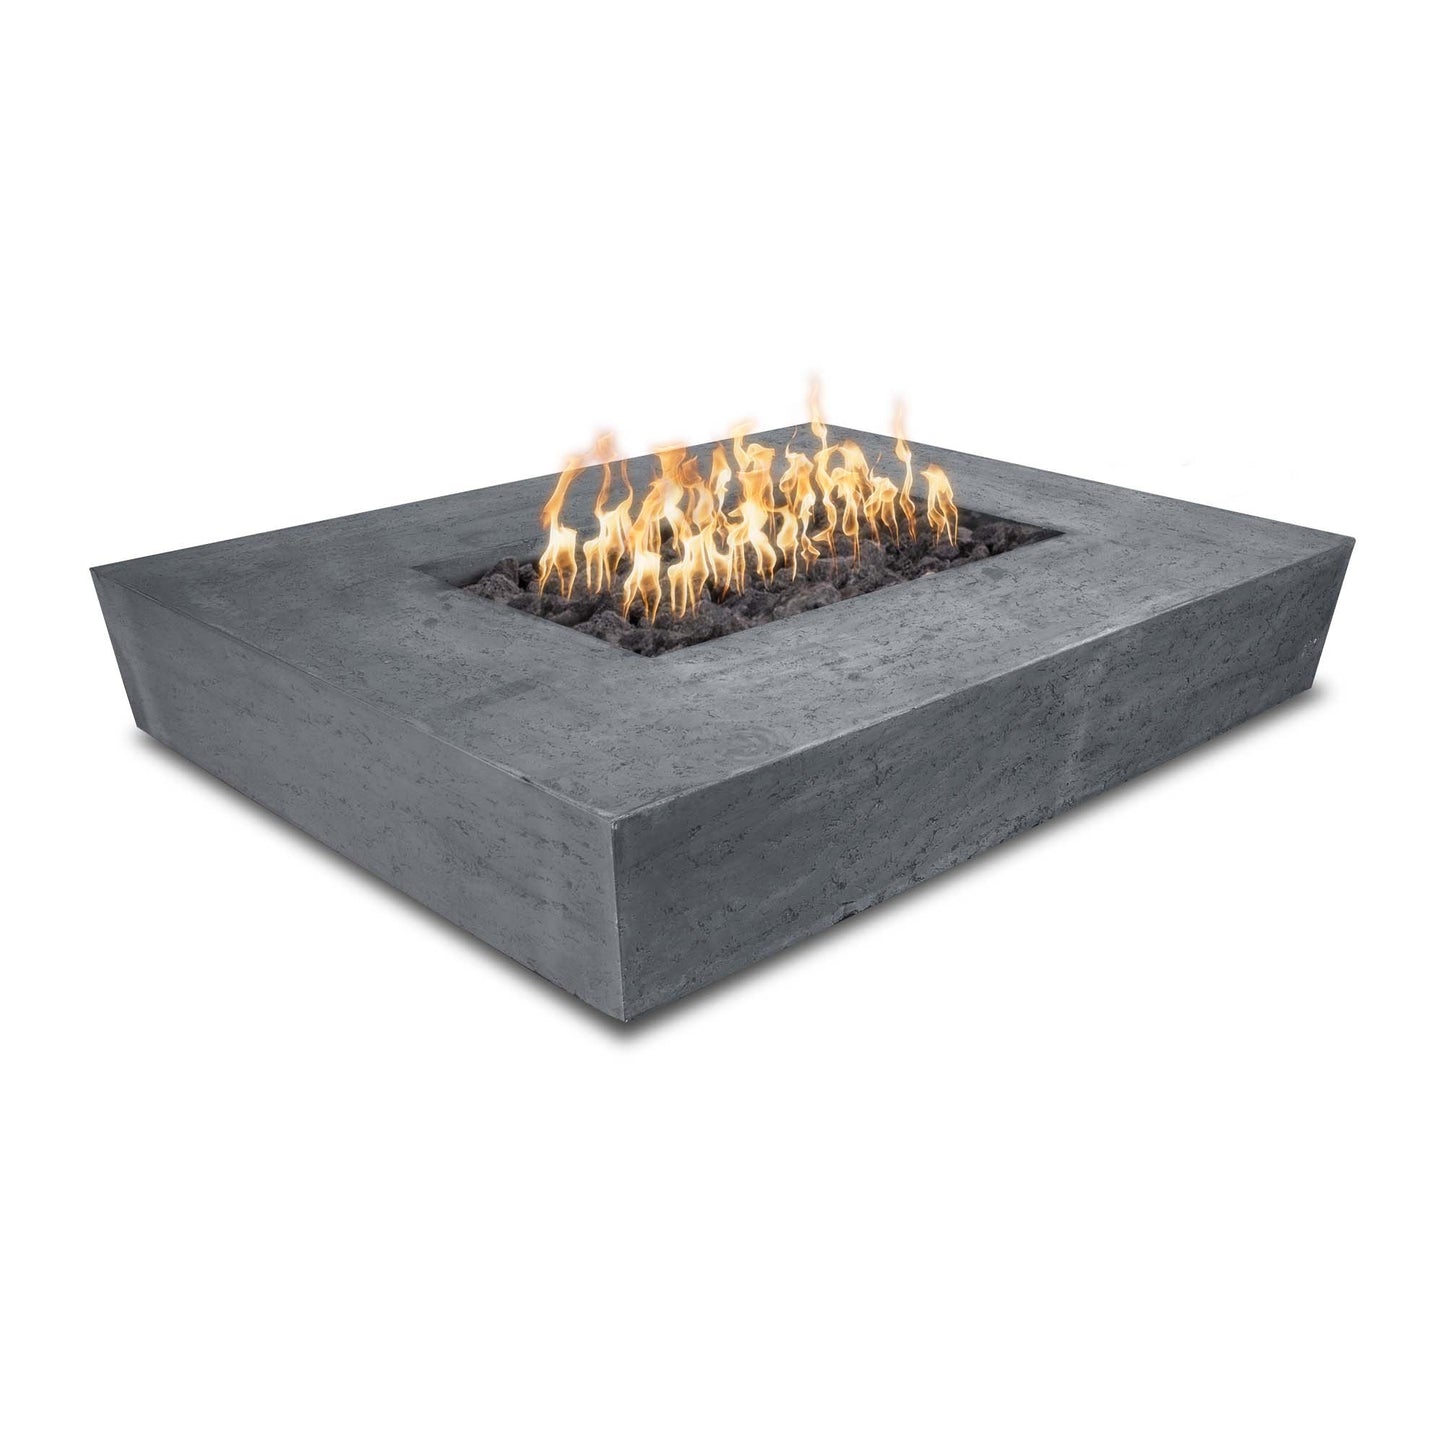 The Outdoor Plus Rectangular Heiko 58" Natural Gray GFRC Concrete Natural Gas Fire Pit with 110V Electronic Ignition